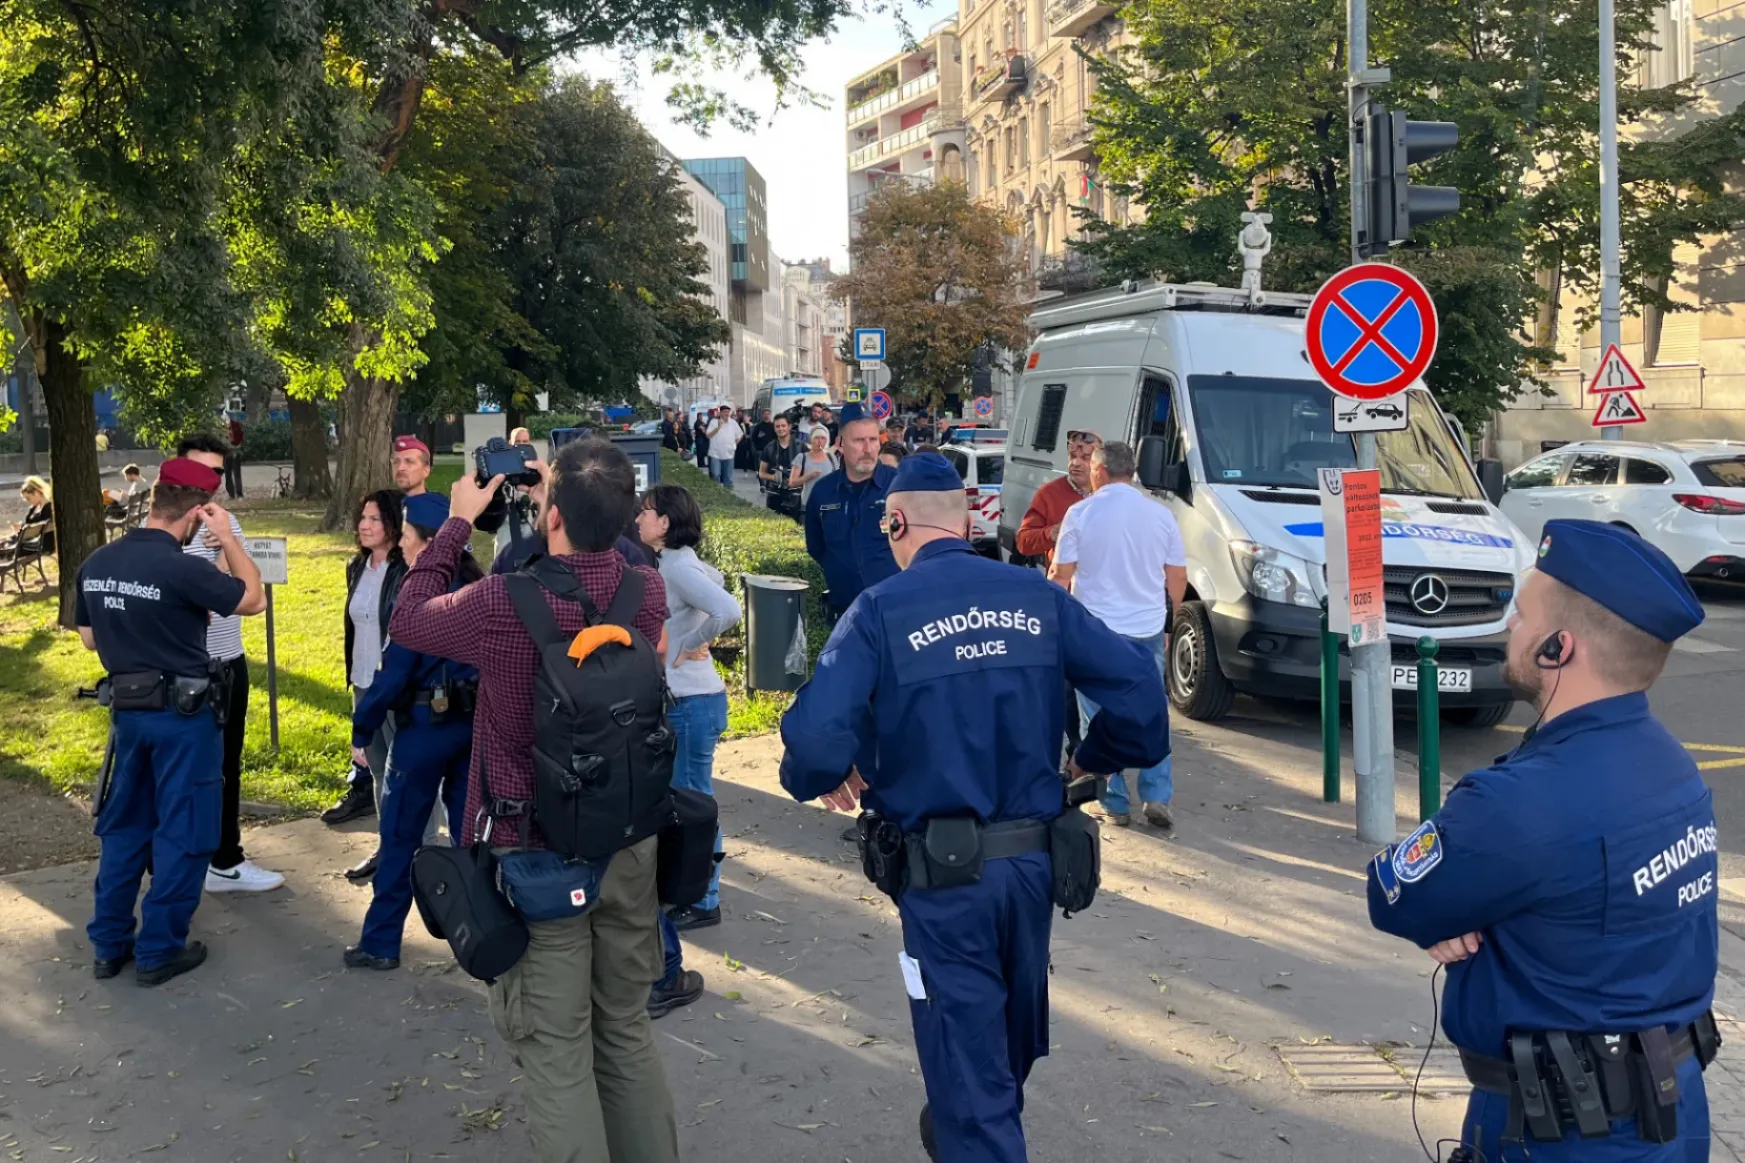 They wanted to protest for the Palestinians, not Hamas, but at Orbán's word, the police banned the demonstration immediately